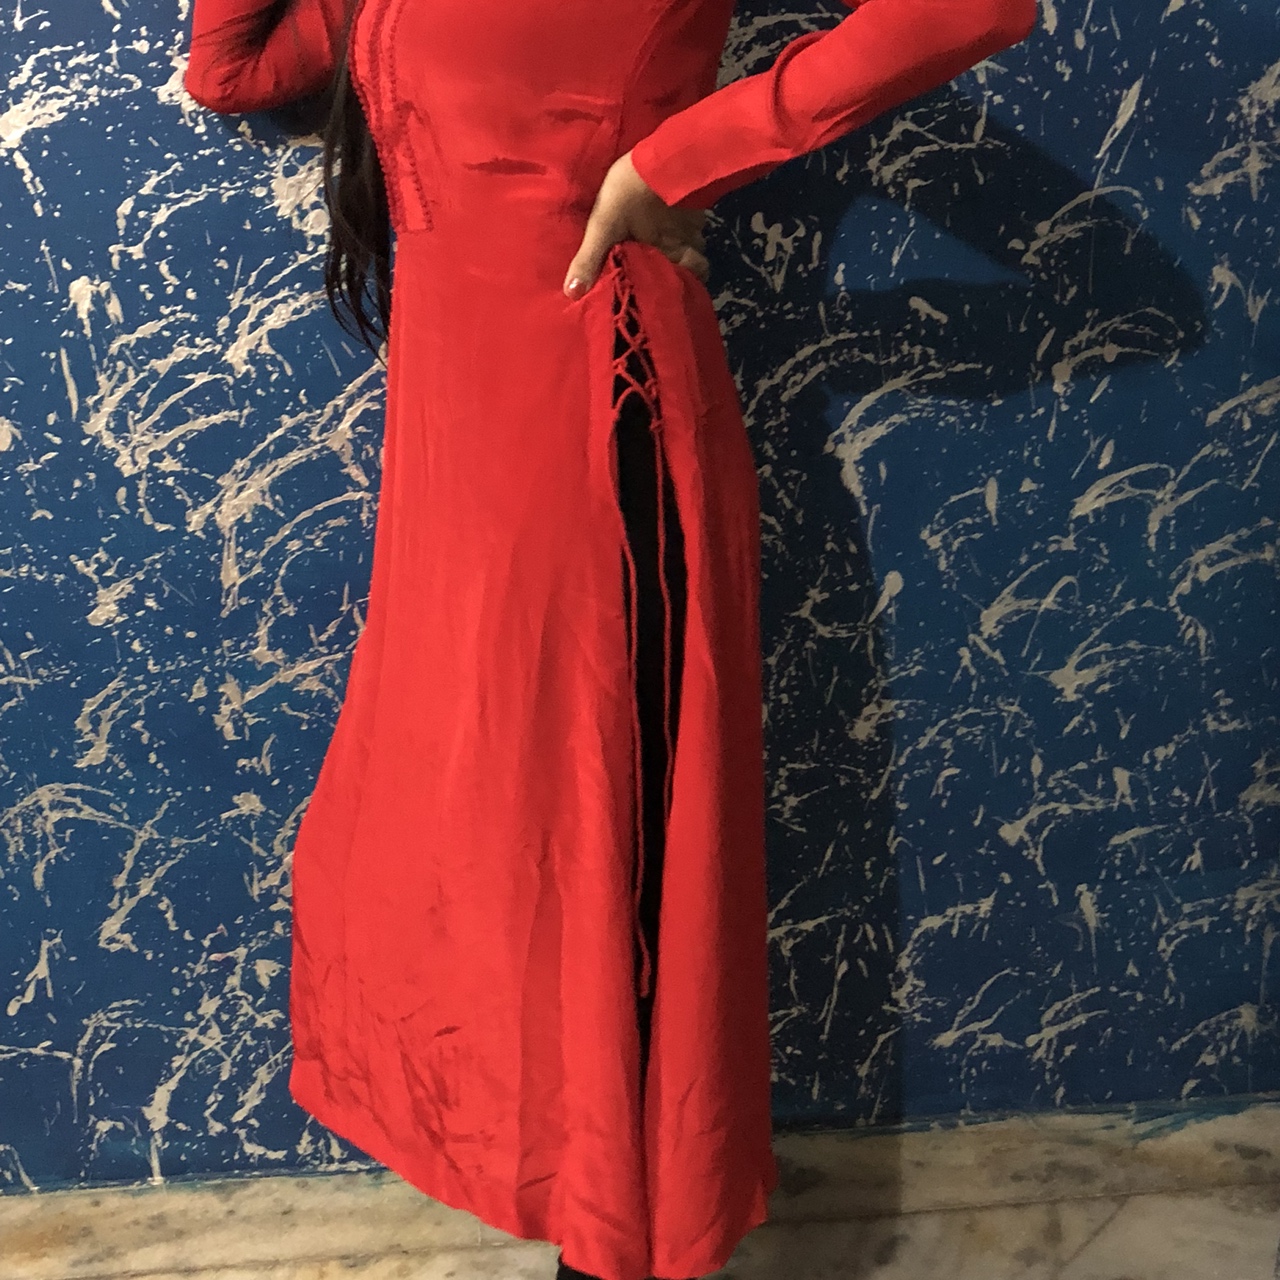 Womens Red Longsleeved Kurti Anushka Sharma From Coutloot Com Buy Womens Red Longsleeved Kurti Anushka Sharma At Best Price Online From Coutloot Com Best Product 3 Day Return Guarantee Free Shipping Cash On Delivery You have no items in your shopping cart. womens red longsleeved kurti anushka